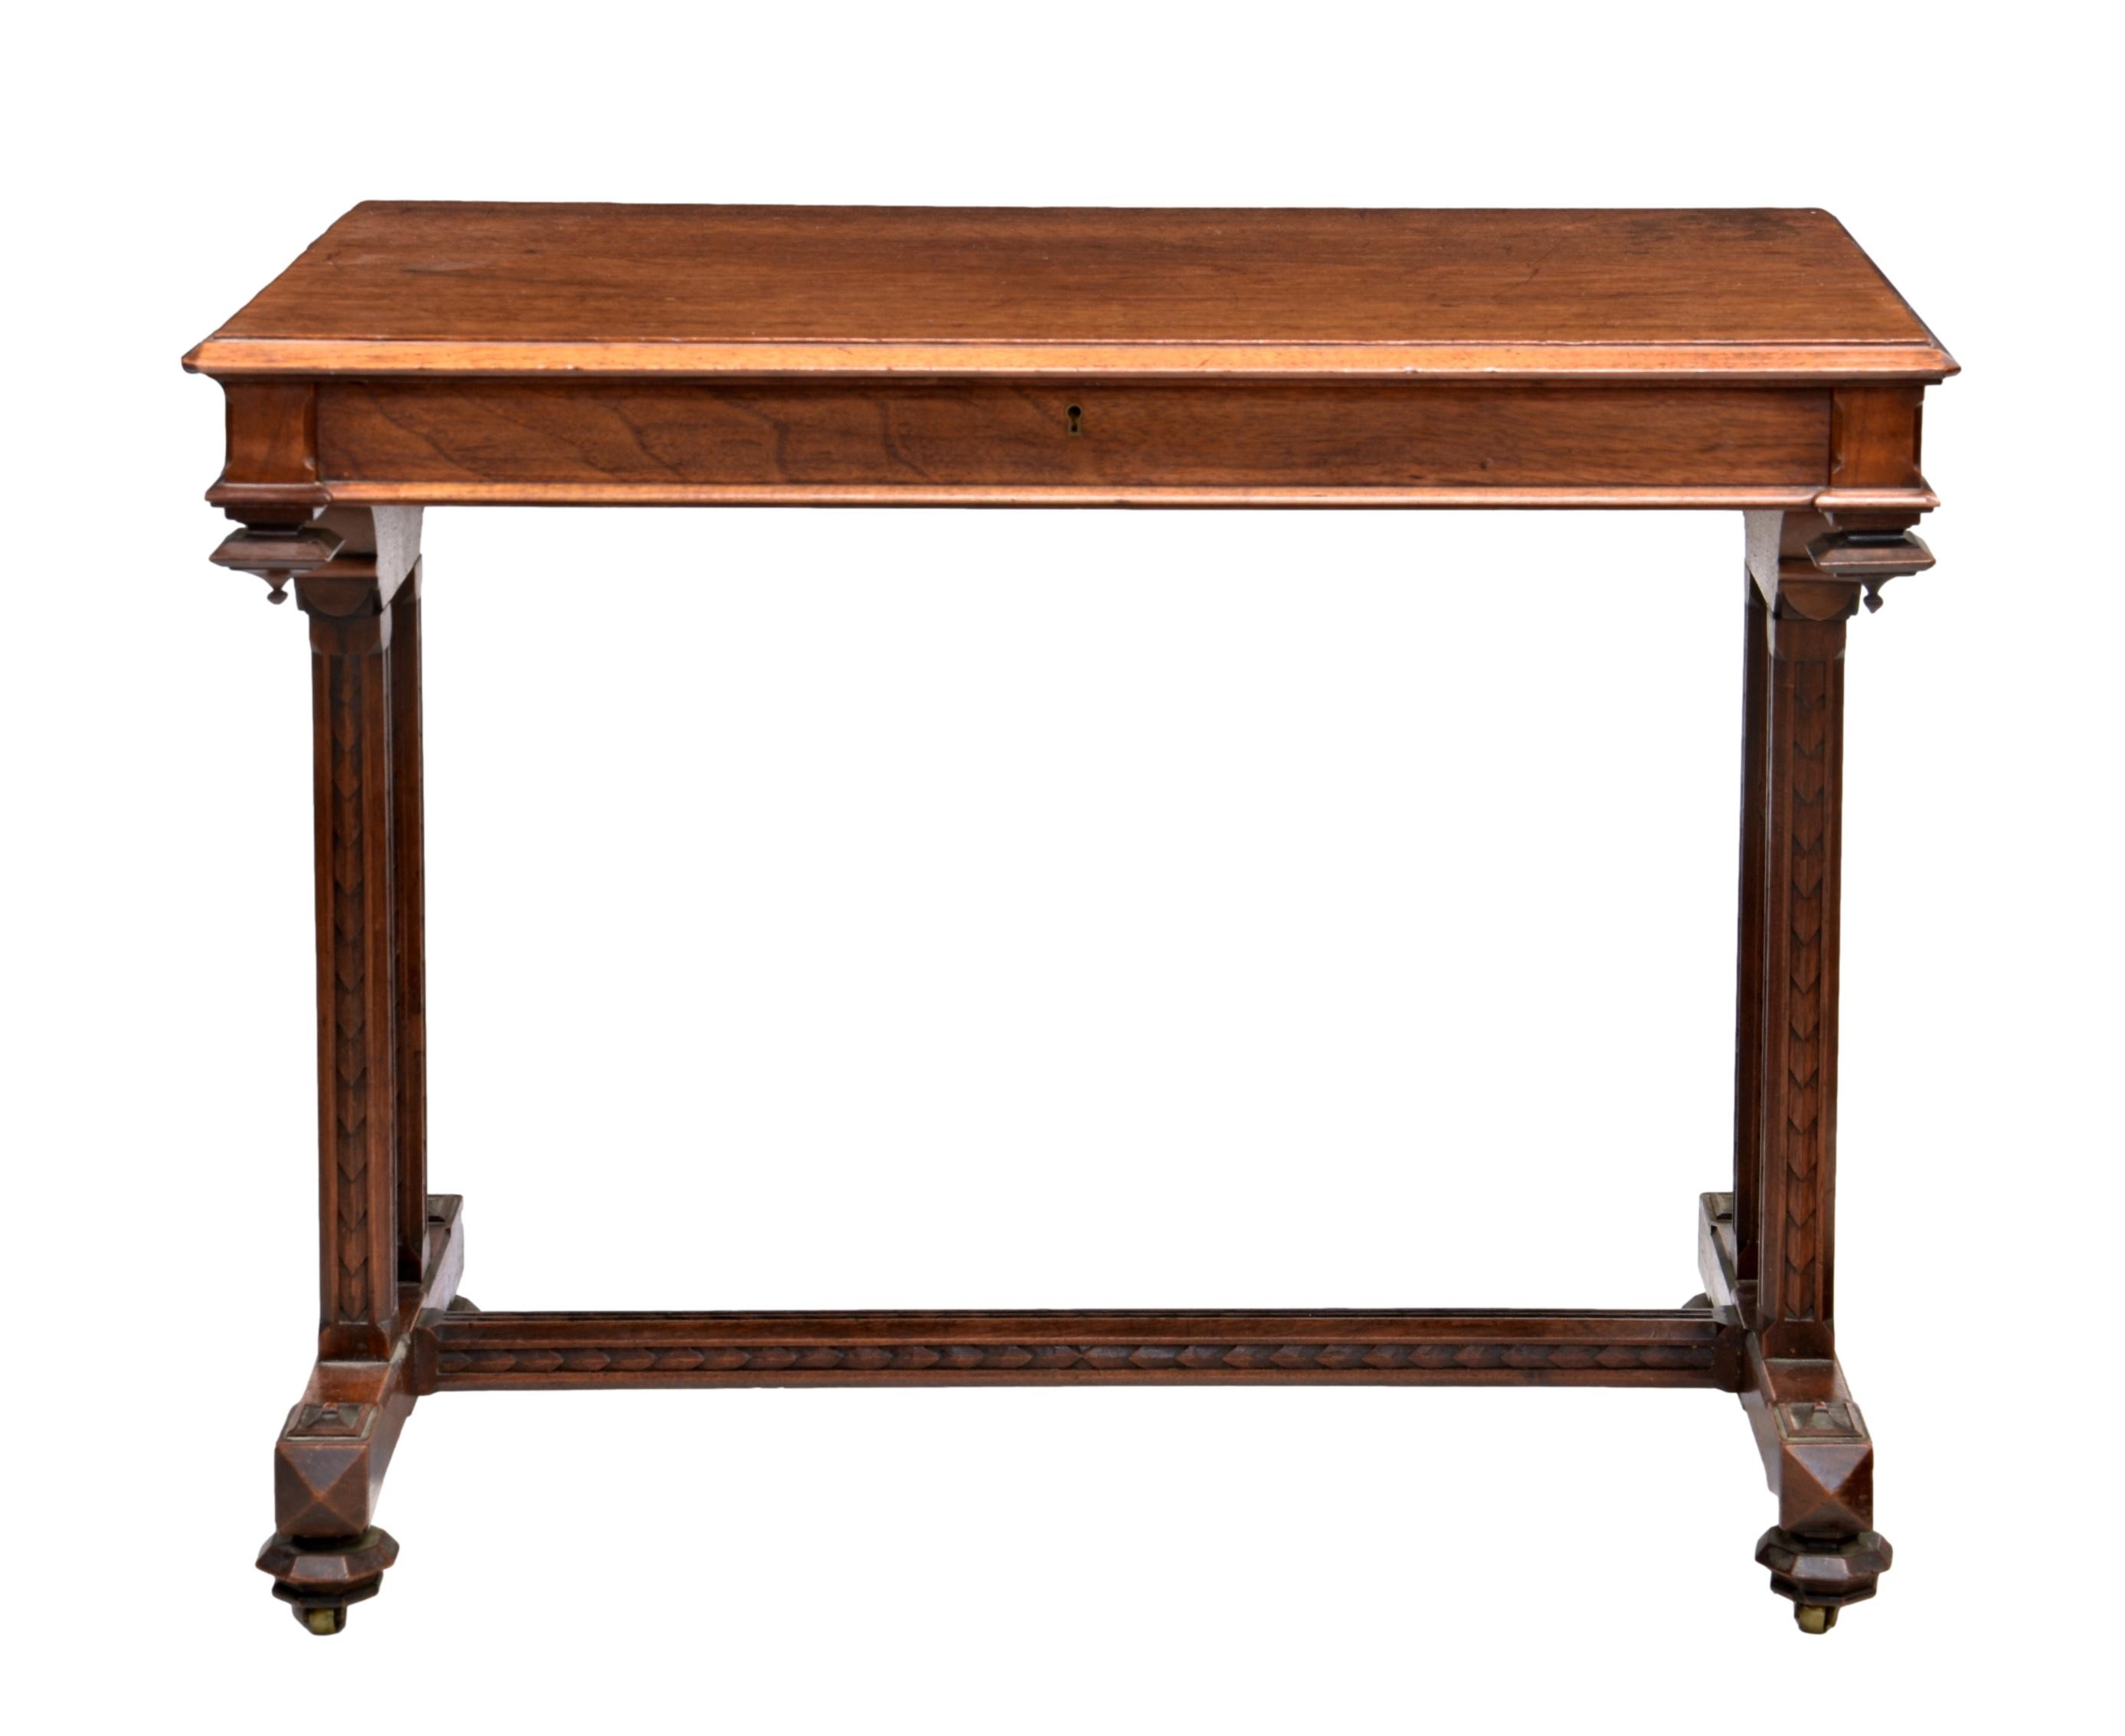 A Victorian walnut centre table by Gillows, stamped 'Gillow' to drawer, the chamfered edged